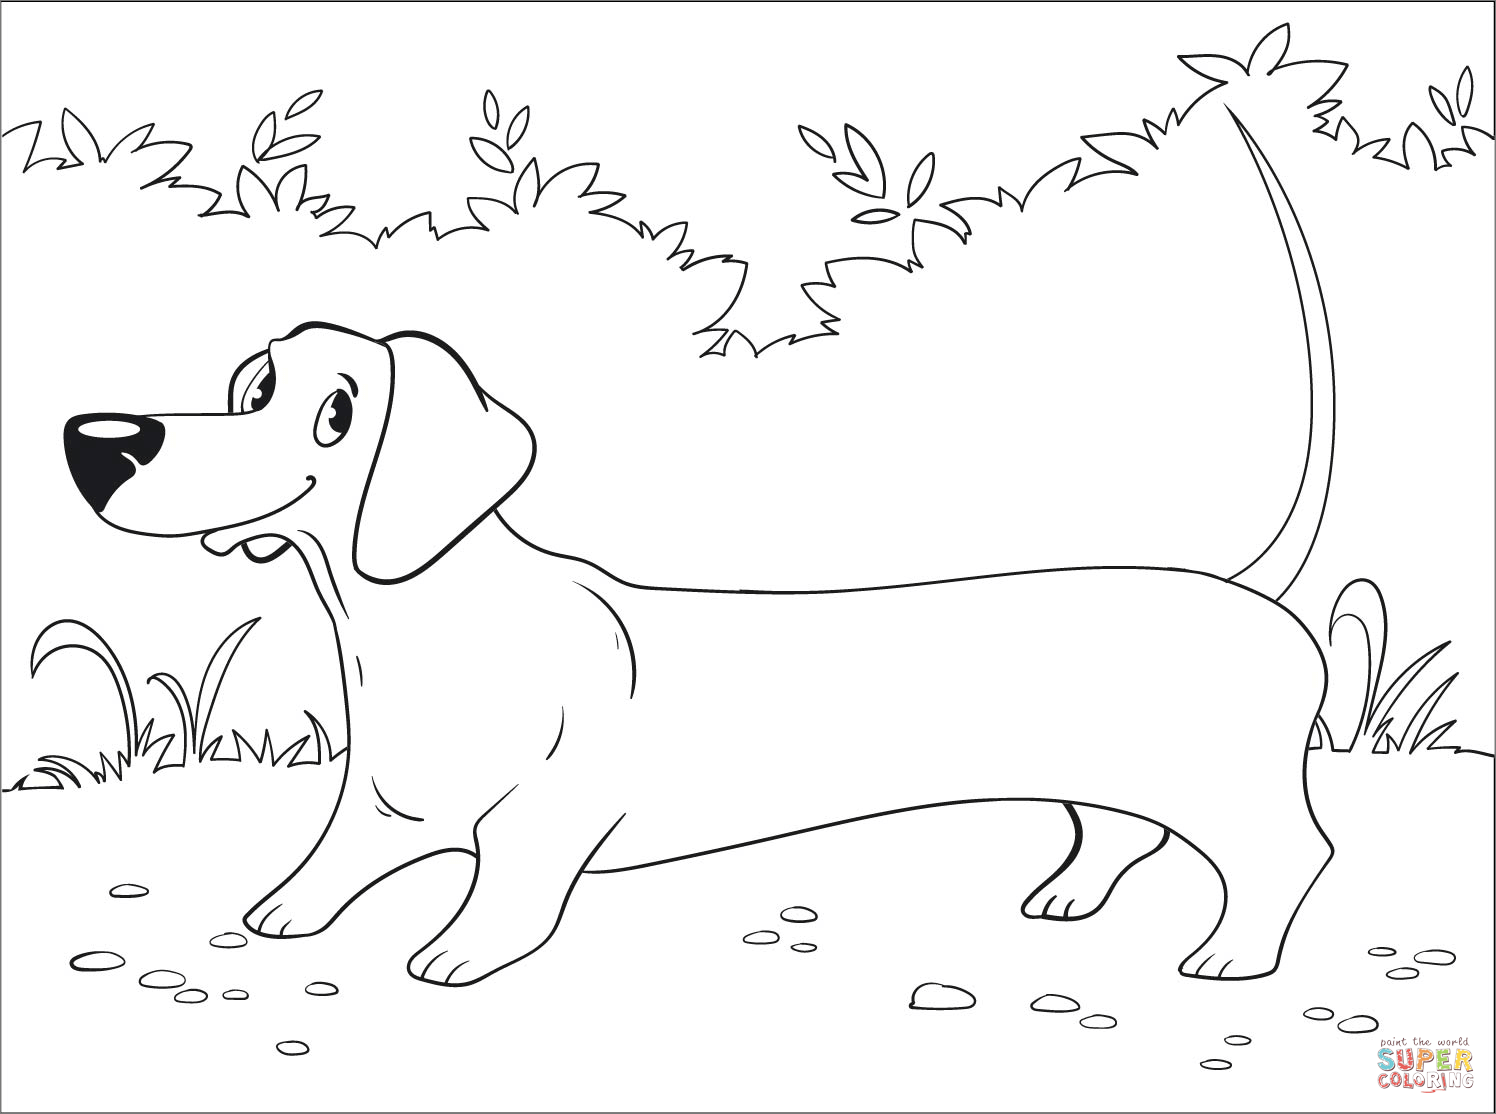 Dachshund coloring page free printable coloring pages